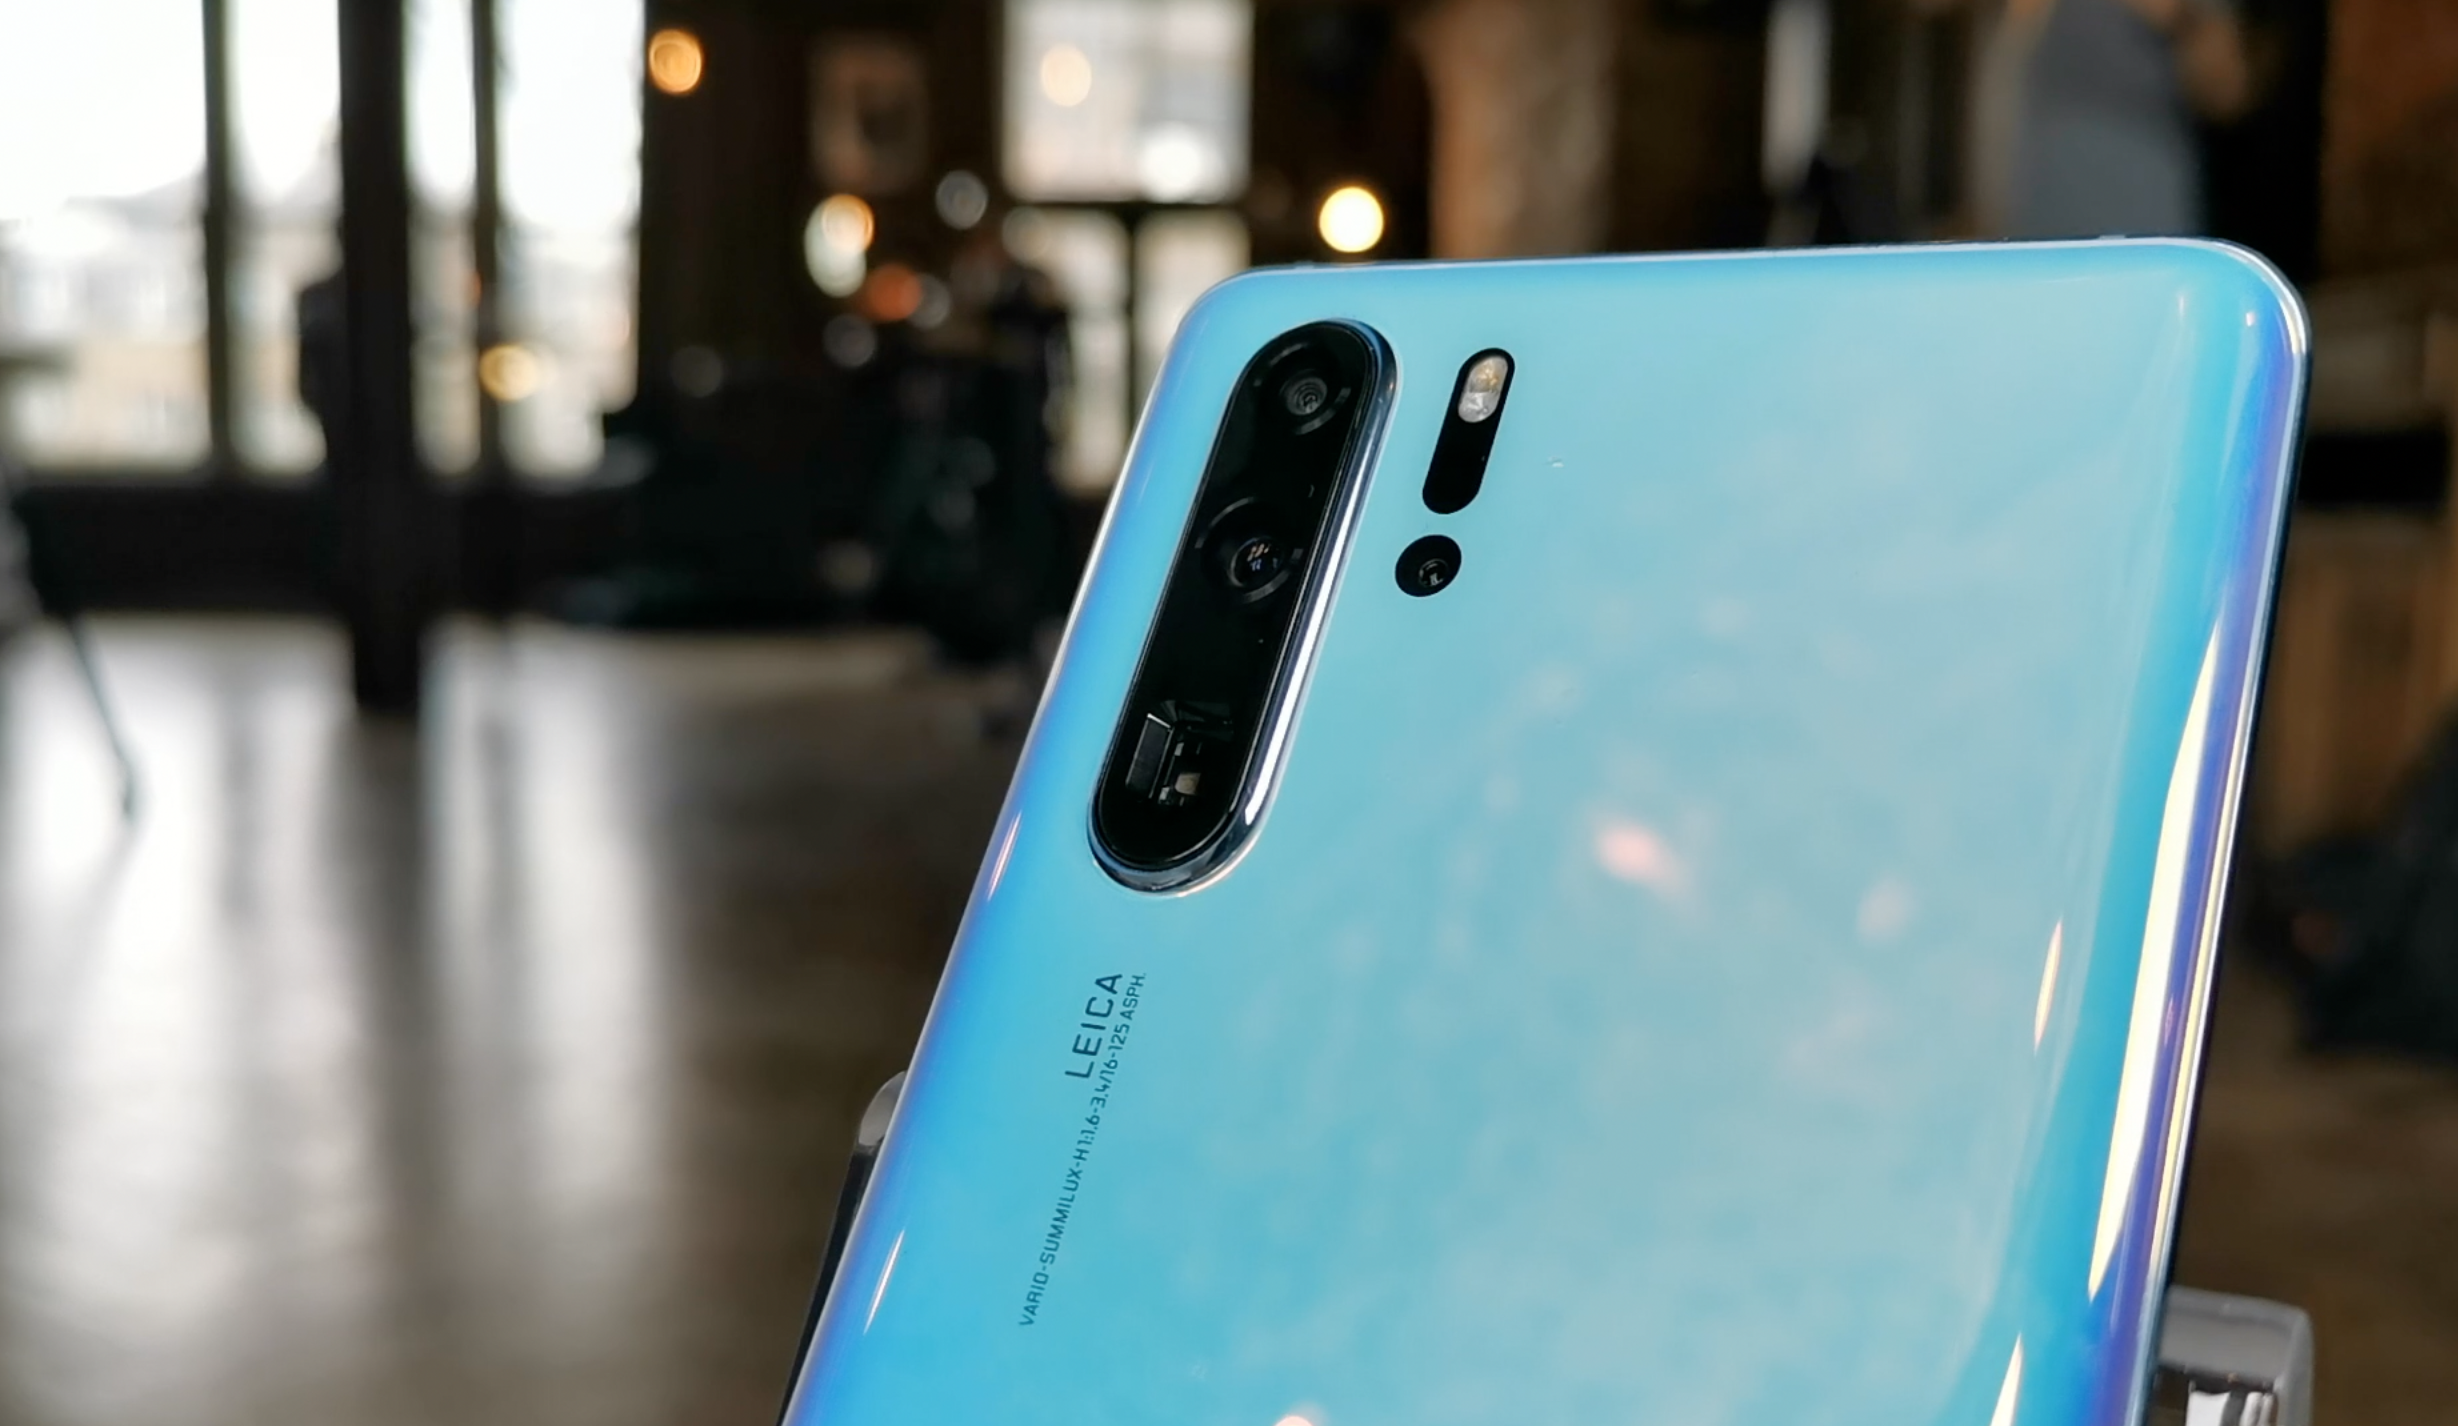 Huawei P30 Pro: Chinese Tech Company at Center of Spy Fears Unveils New